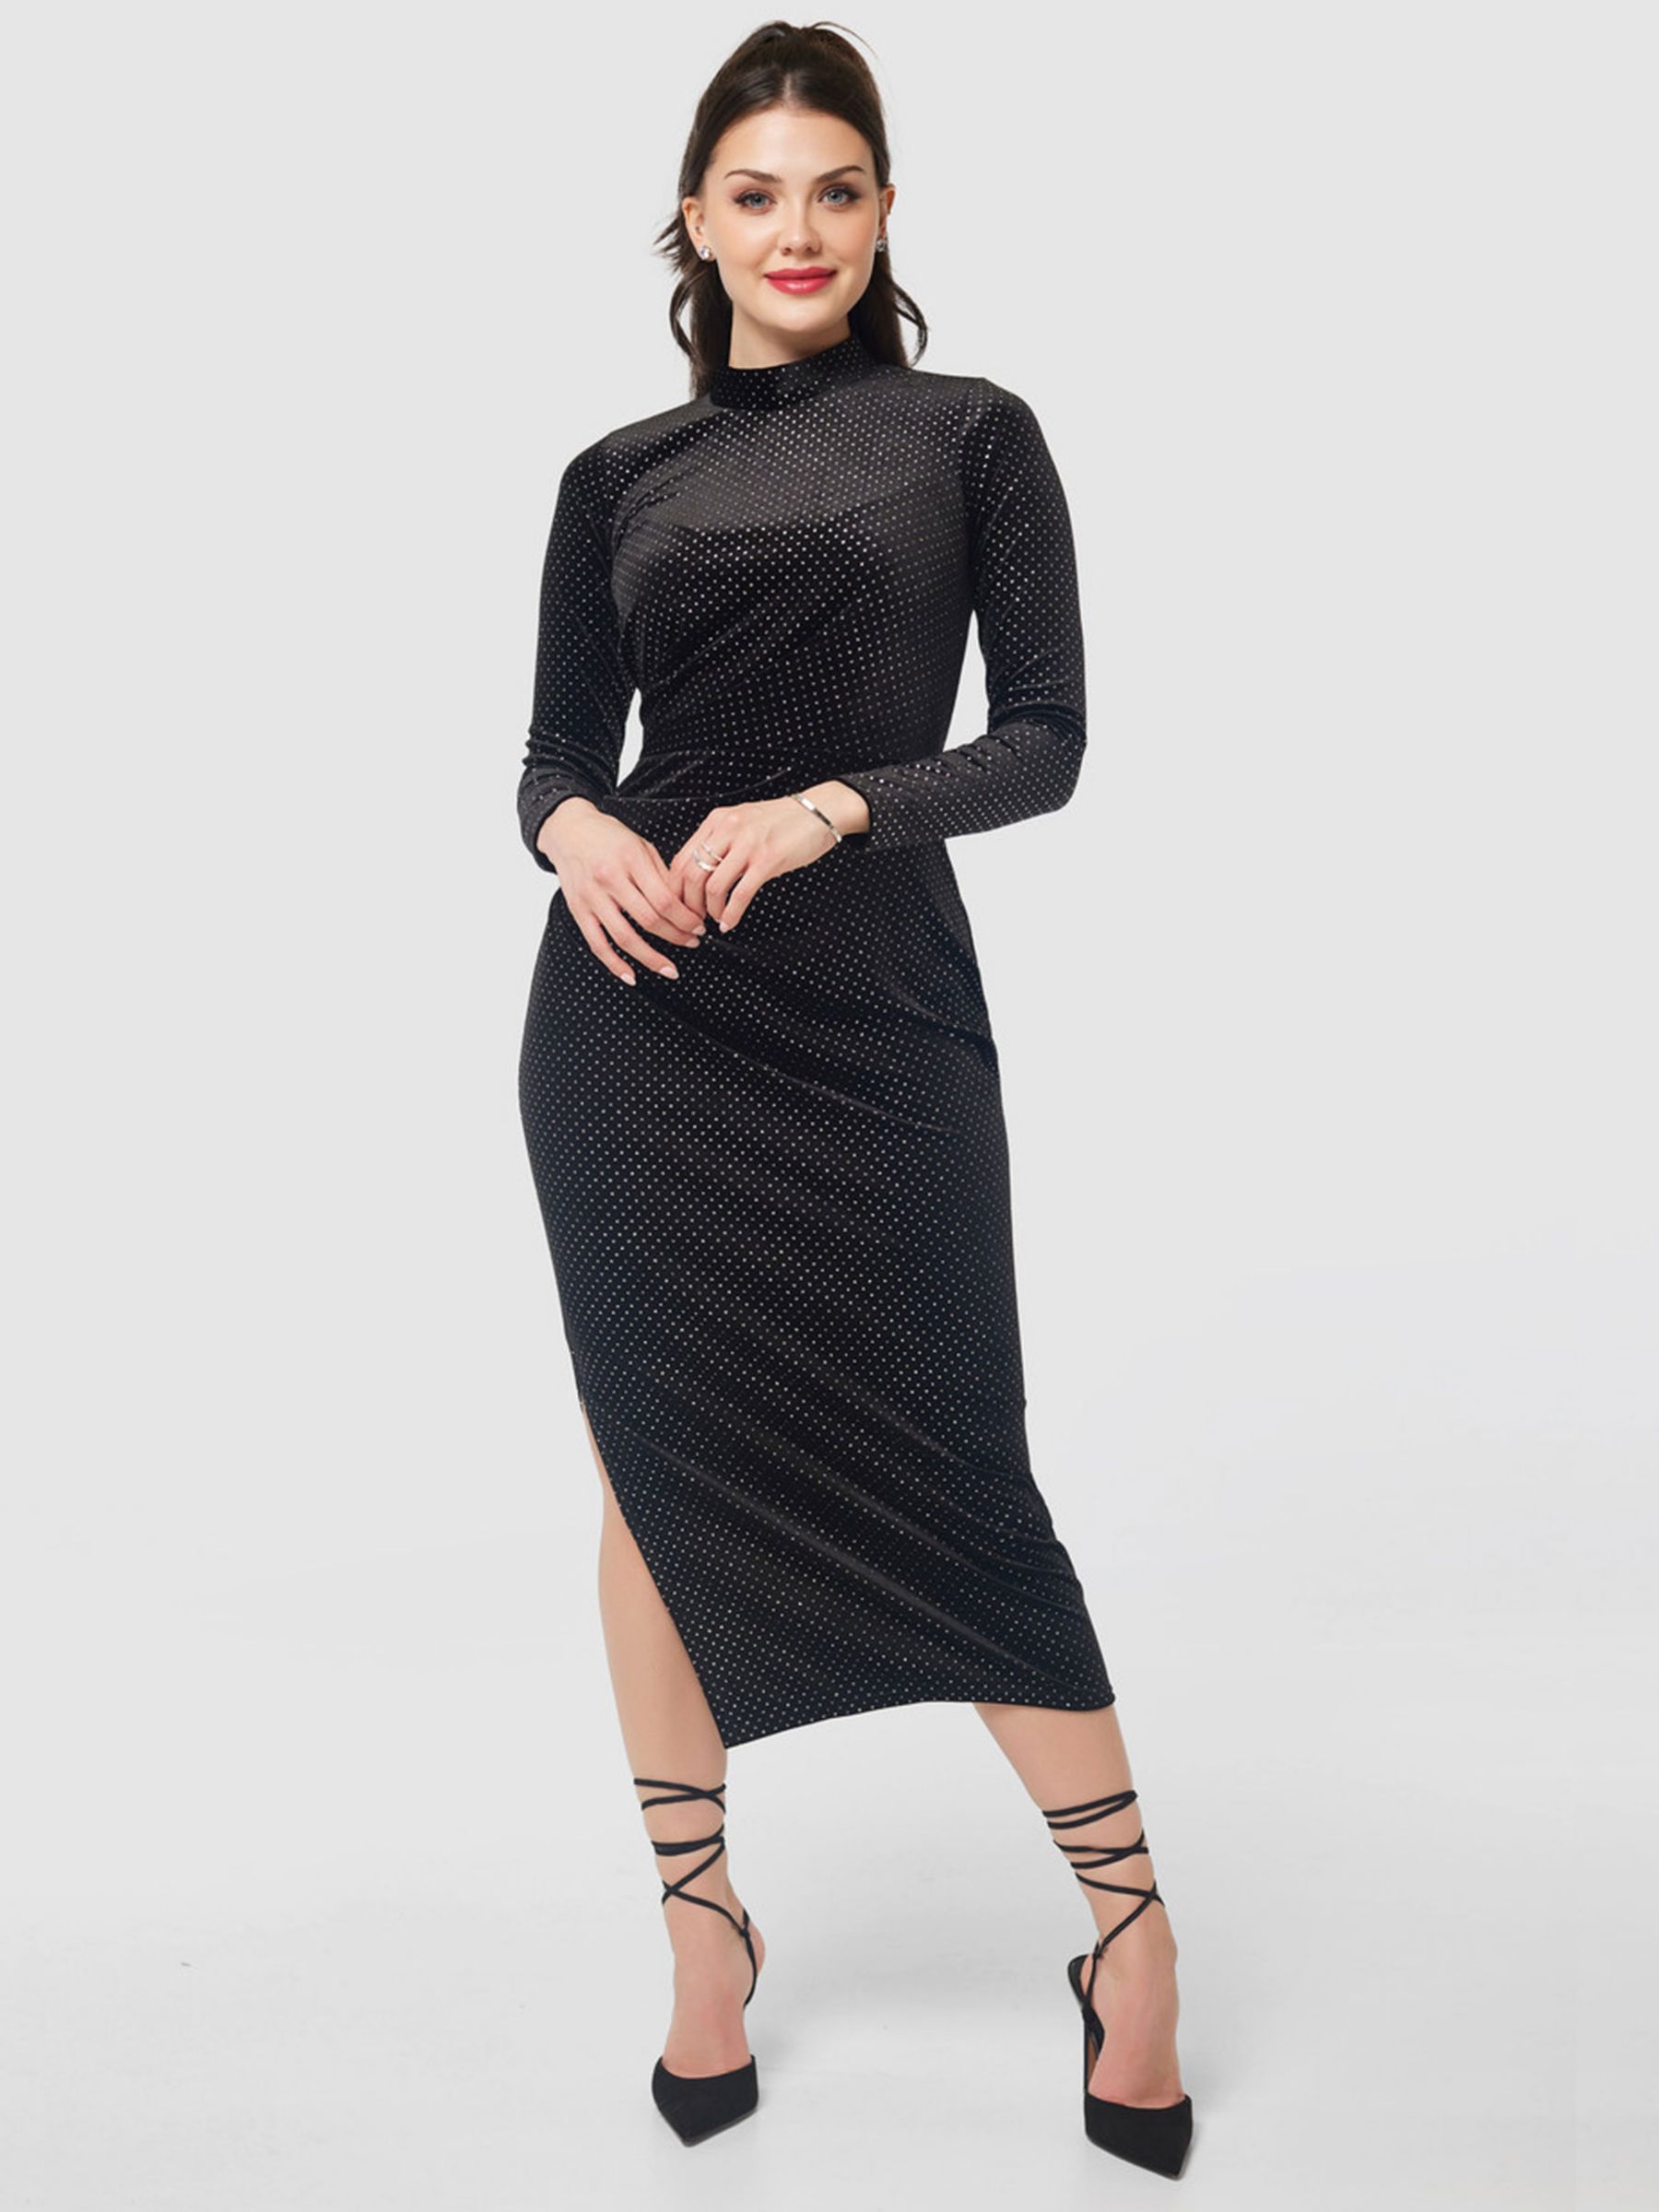 Black and White Dress with Black Turtleneck and Black Tights — bows &  sequins